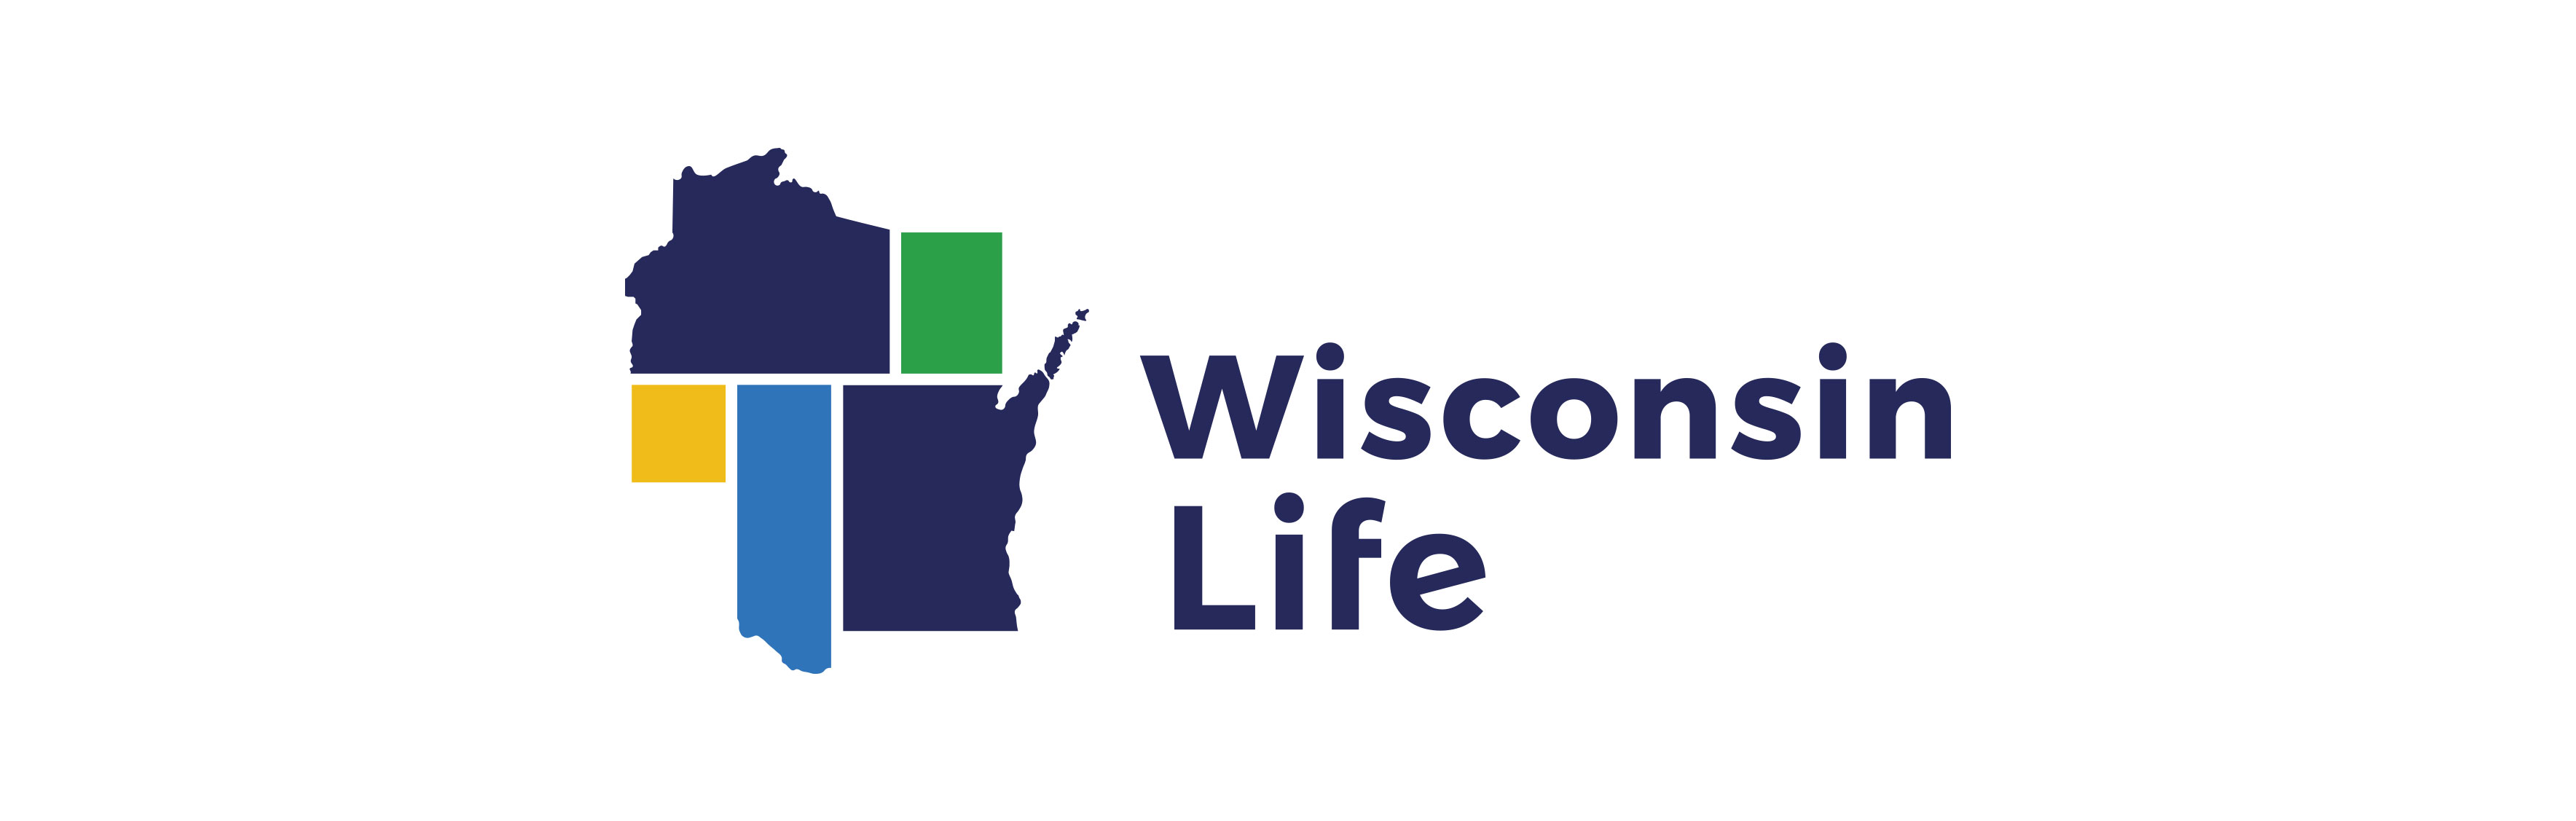 Full-color Wisconsin Life logo